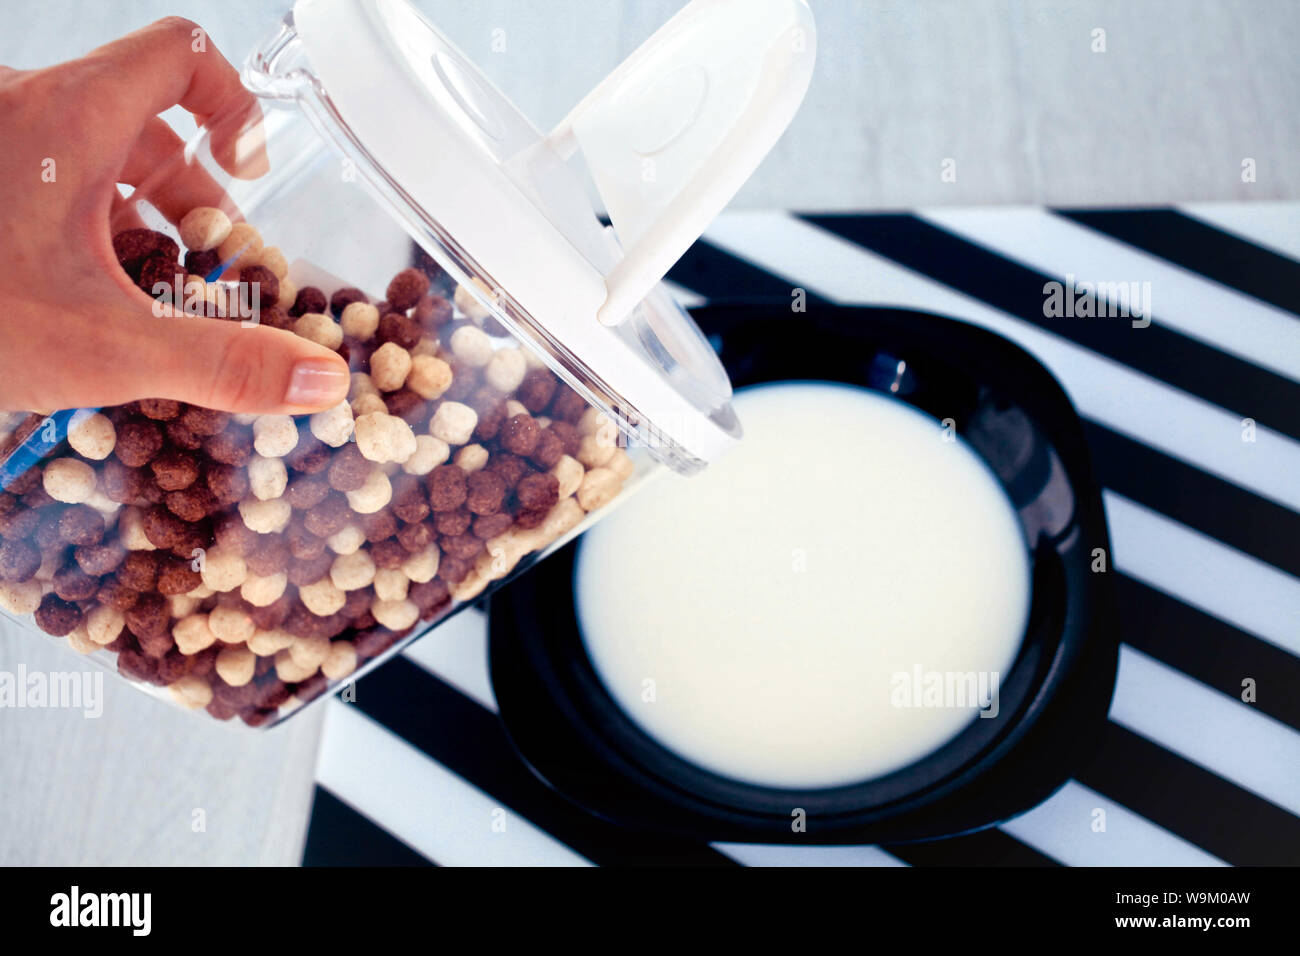 female hand holds in hand the container chocolate cereal and corn balls and a black plate with milk. Stock Photo